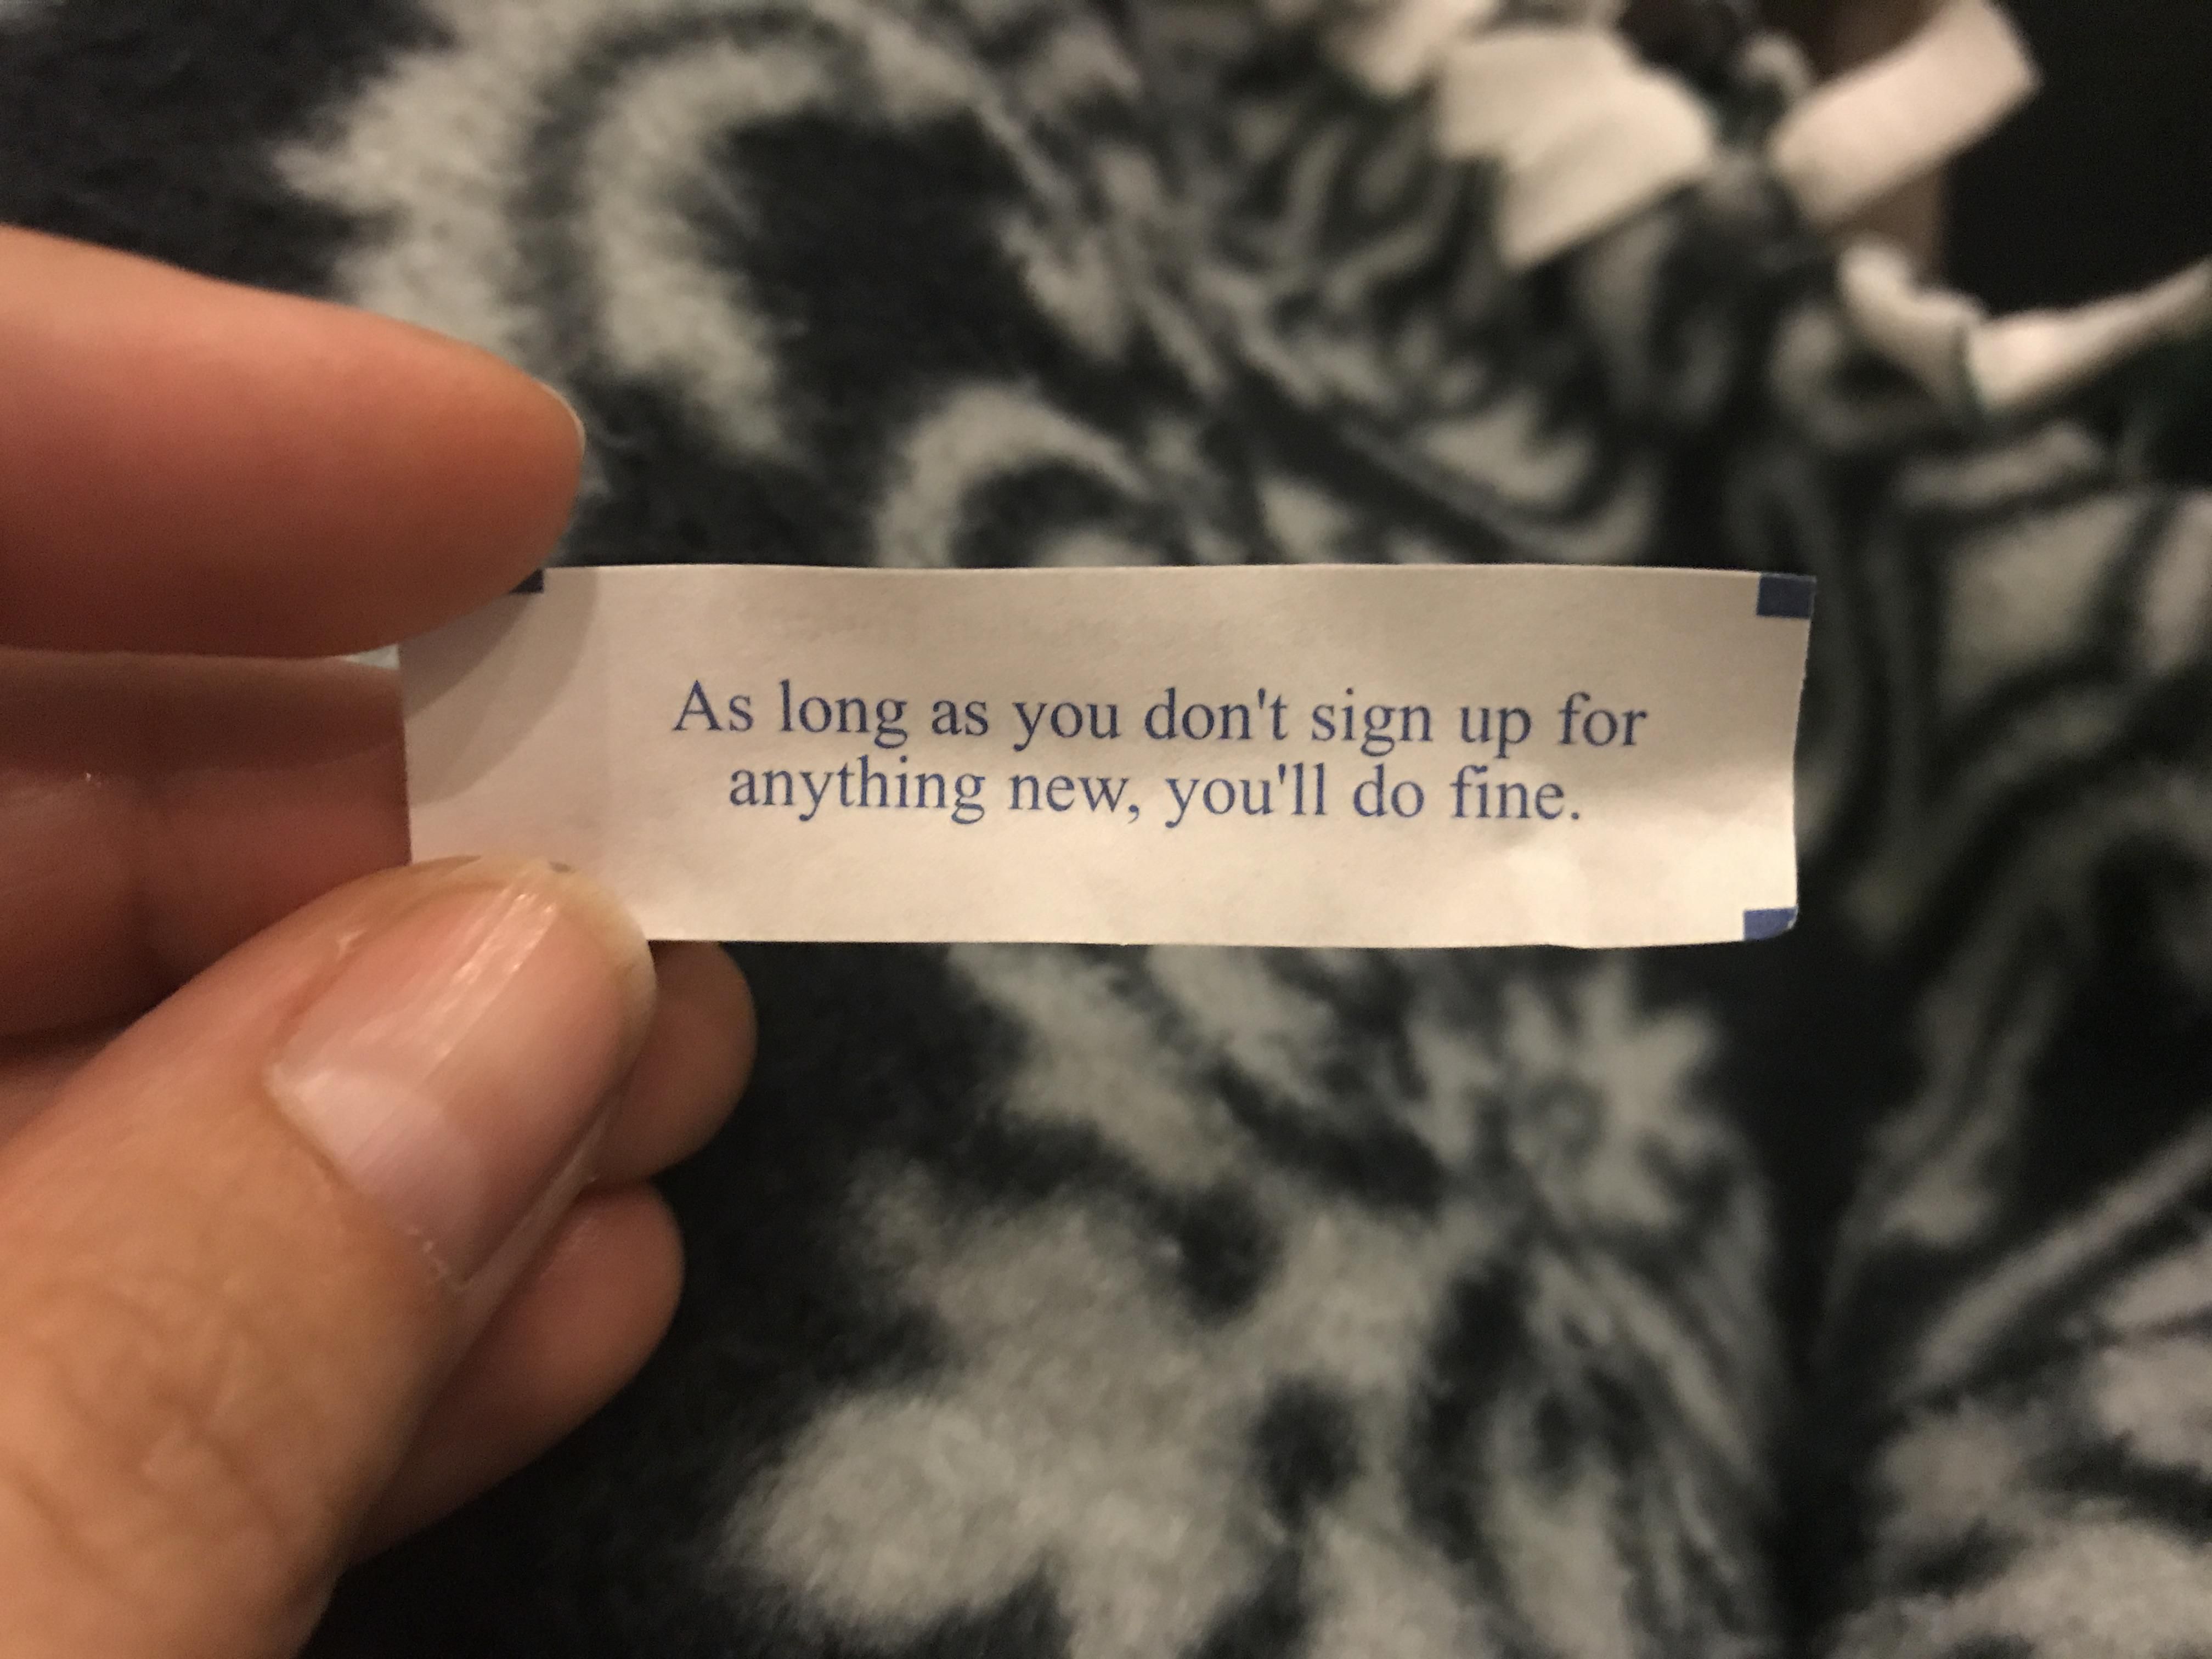 My fortune cookie knows I've reached my full potential.